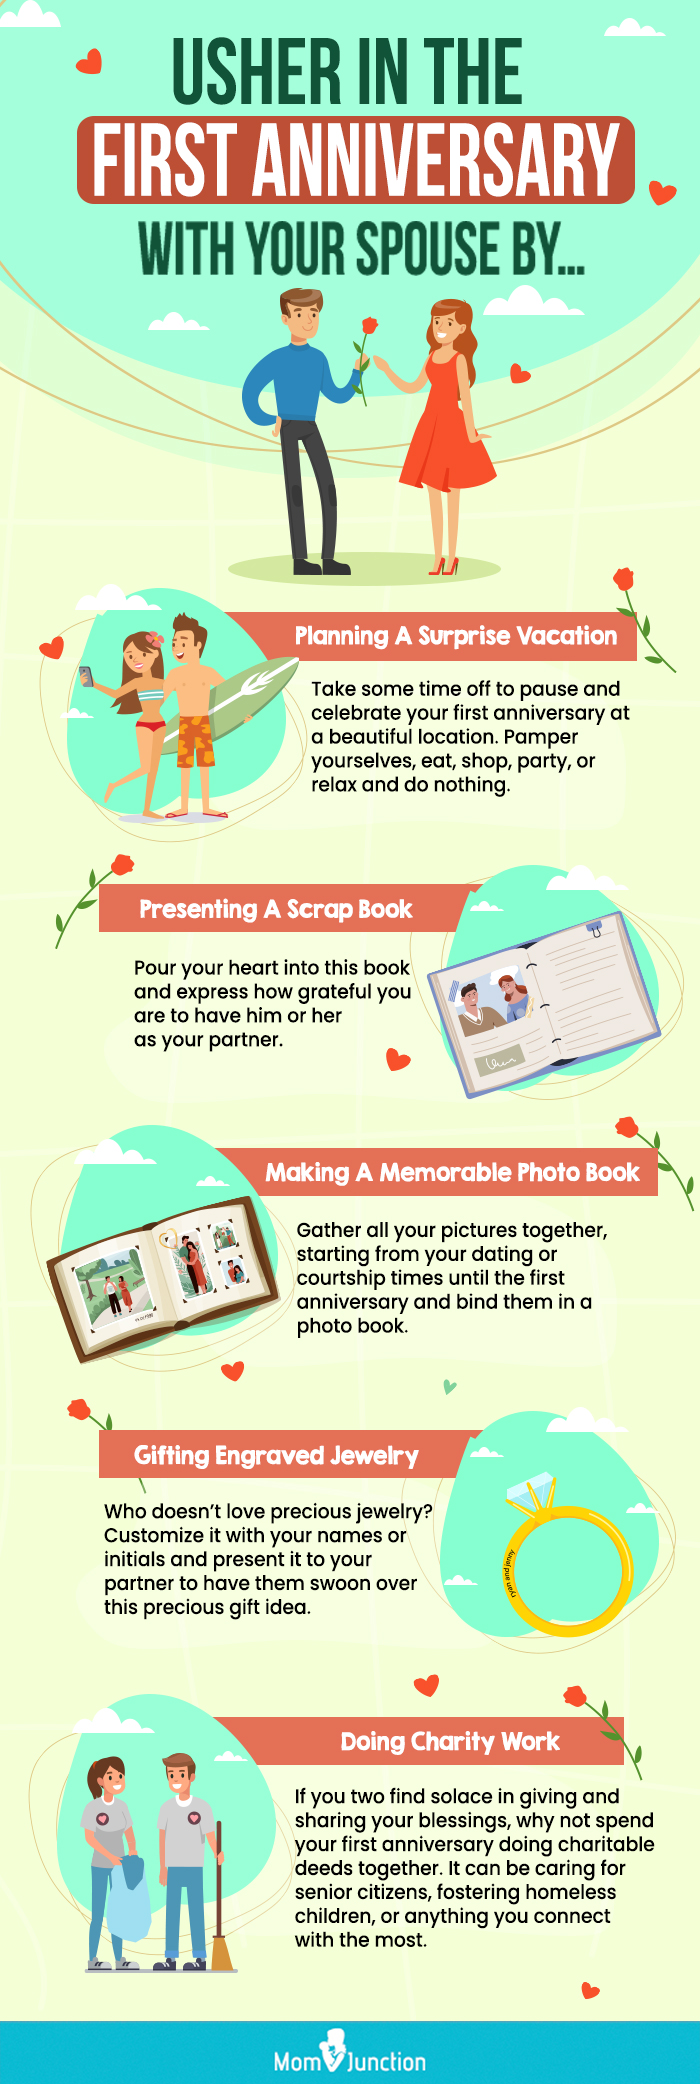 usher in the first anniversary with your spouse by (infographic)